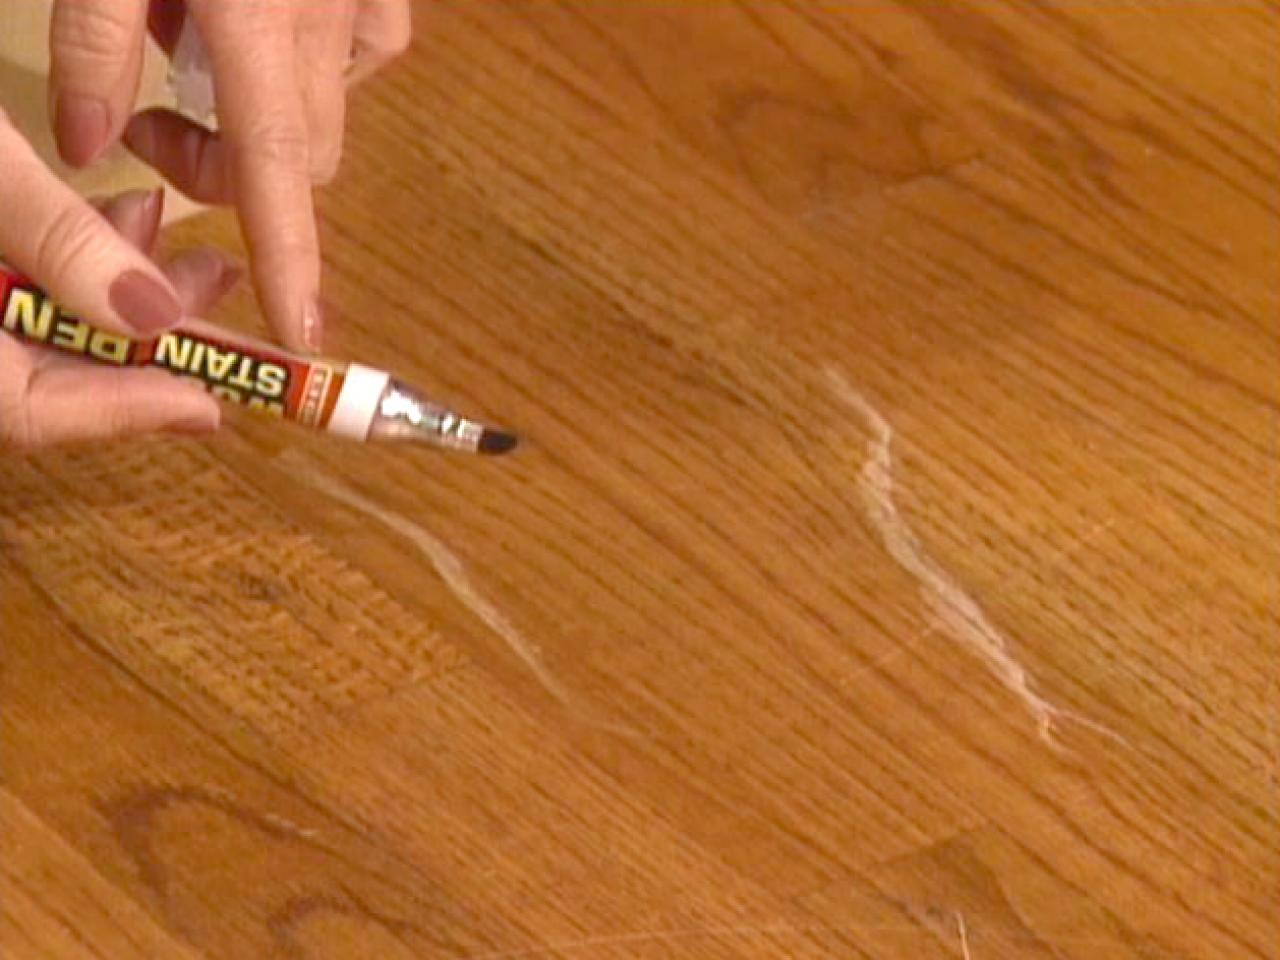 How To Touch Up Wood Floors Tos Diy, How To Get Scratches Out Of Laminate Wood Floors